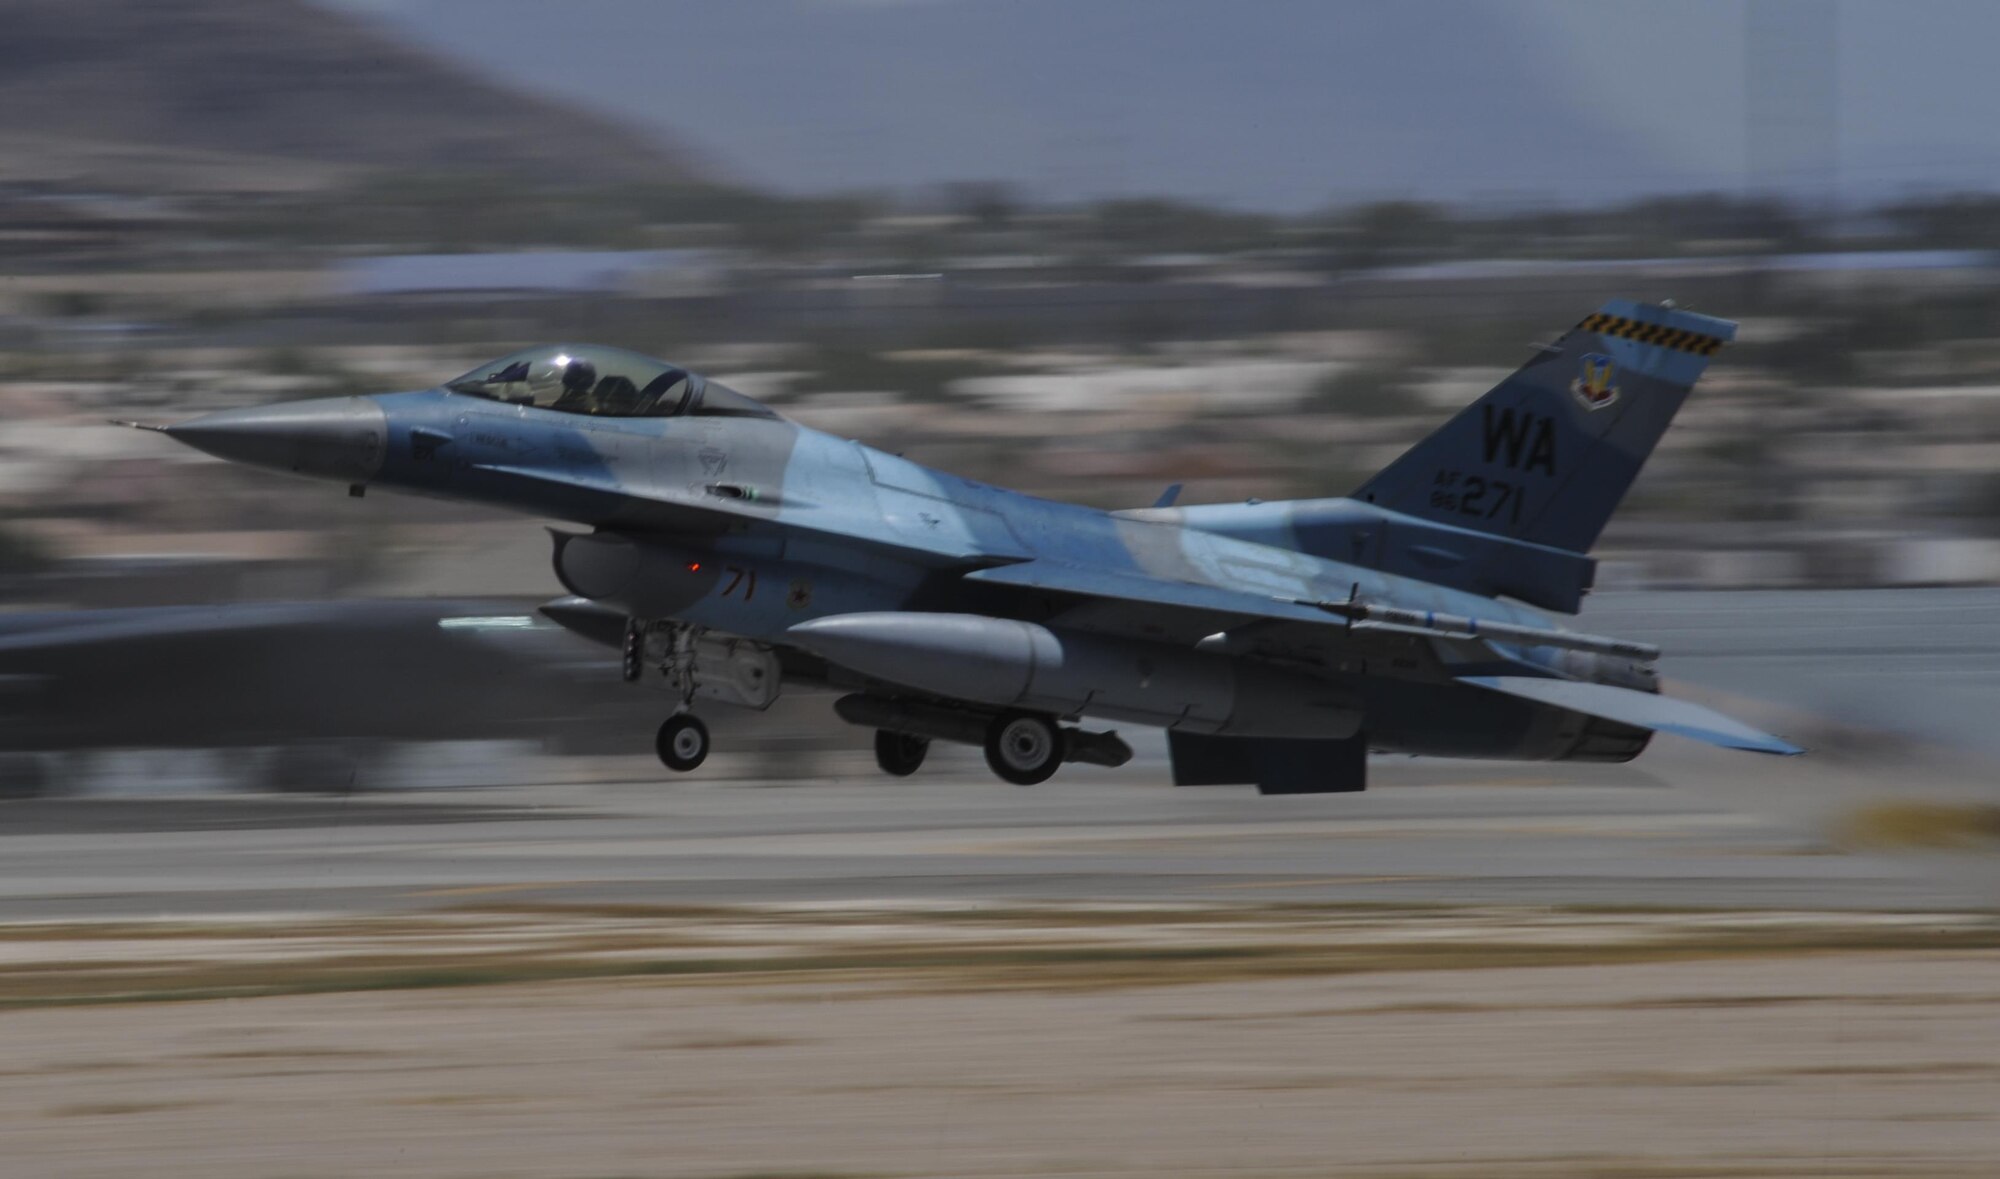 An F-16 Fighting Falcon, assigned to the 64th Aggressor Squadron, takes off during the first day of Red Flag 16-3 at Nellis Air Force Base, Nev., July 11, 2016. Red Flag involves a variety of attack, fighter, bomber, reconnaissance, electronic warfare, air lift support, search and rescue aircraft. (U.S. Air Force photo by Airman 1st Class Kevin Tanenbaum)